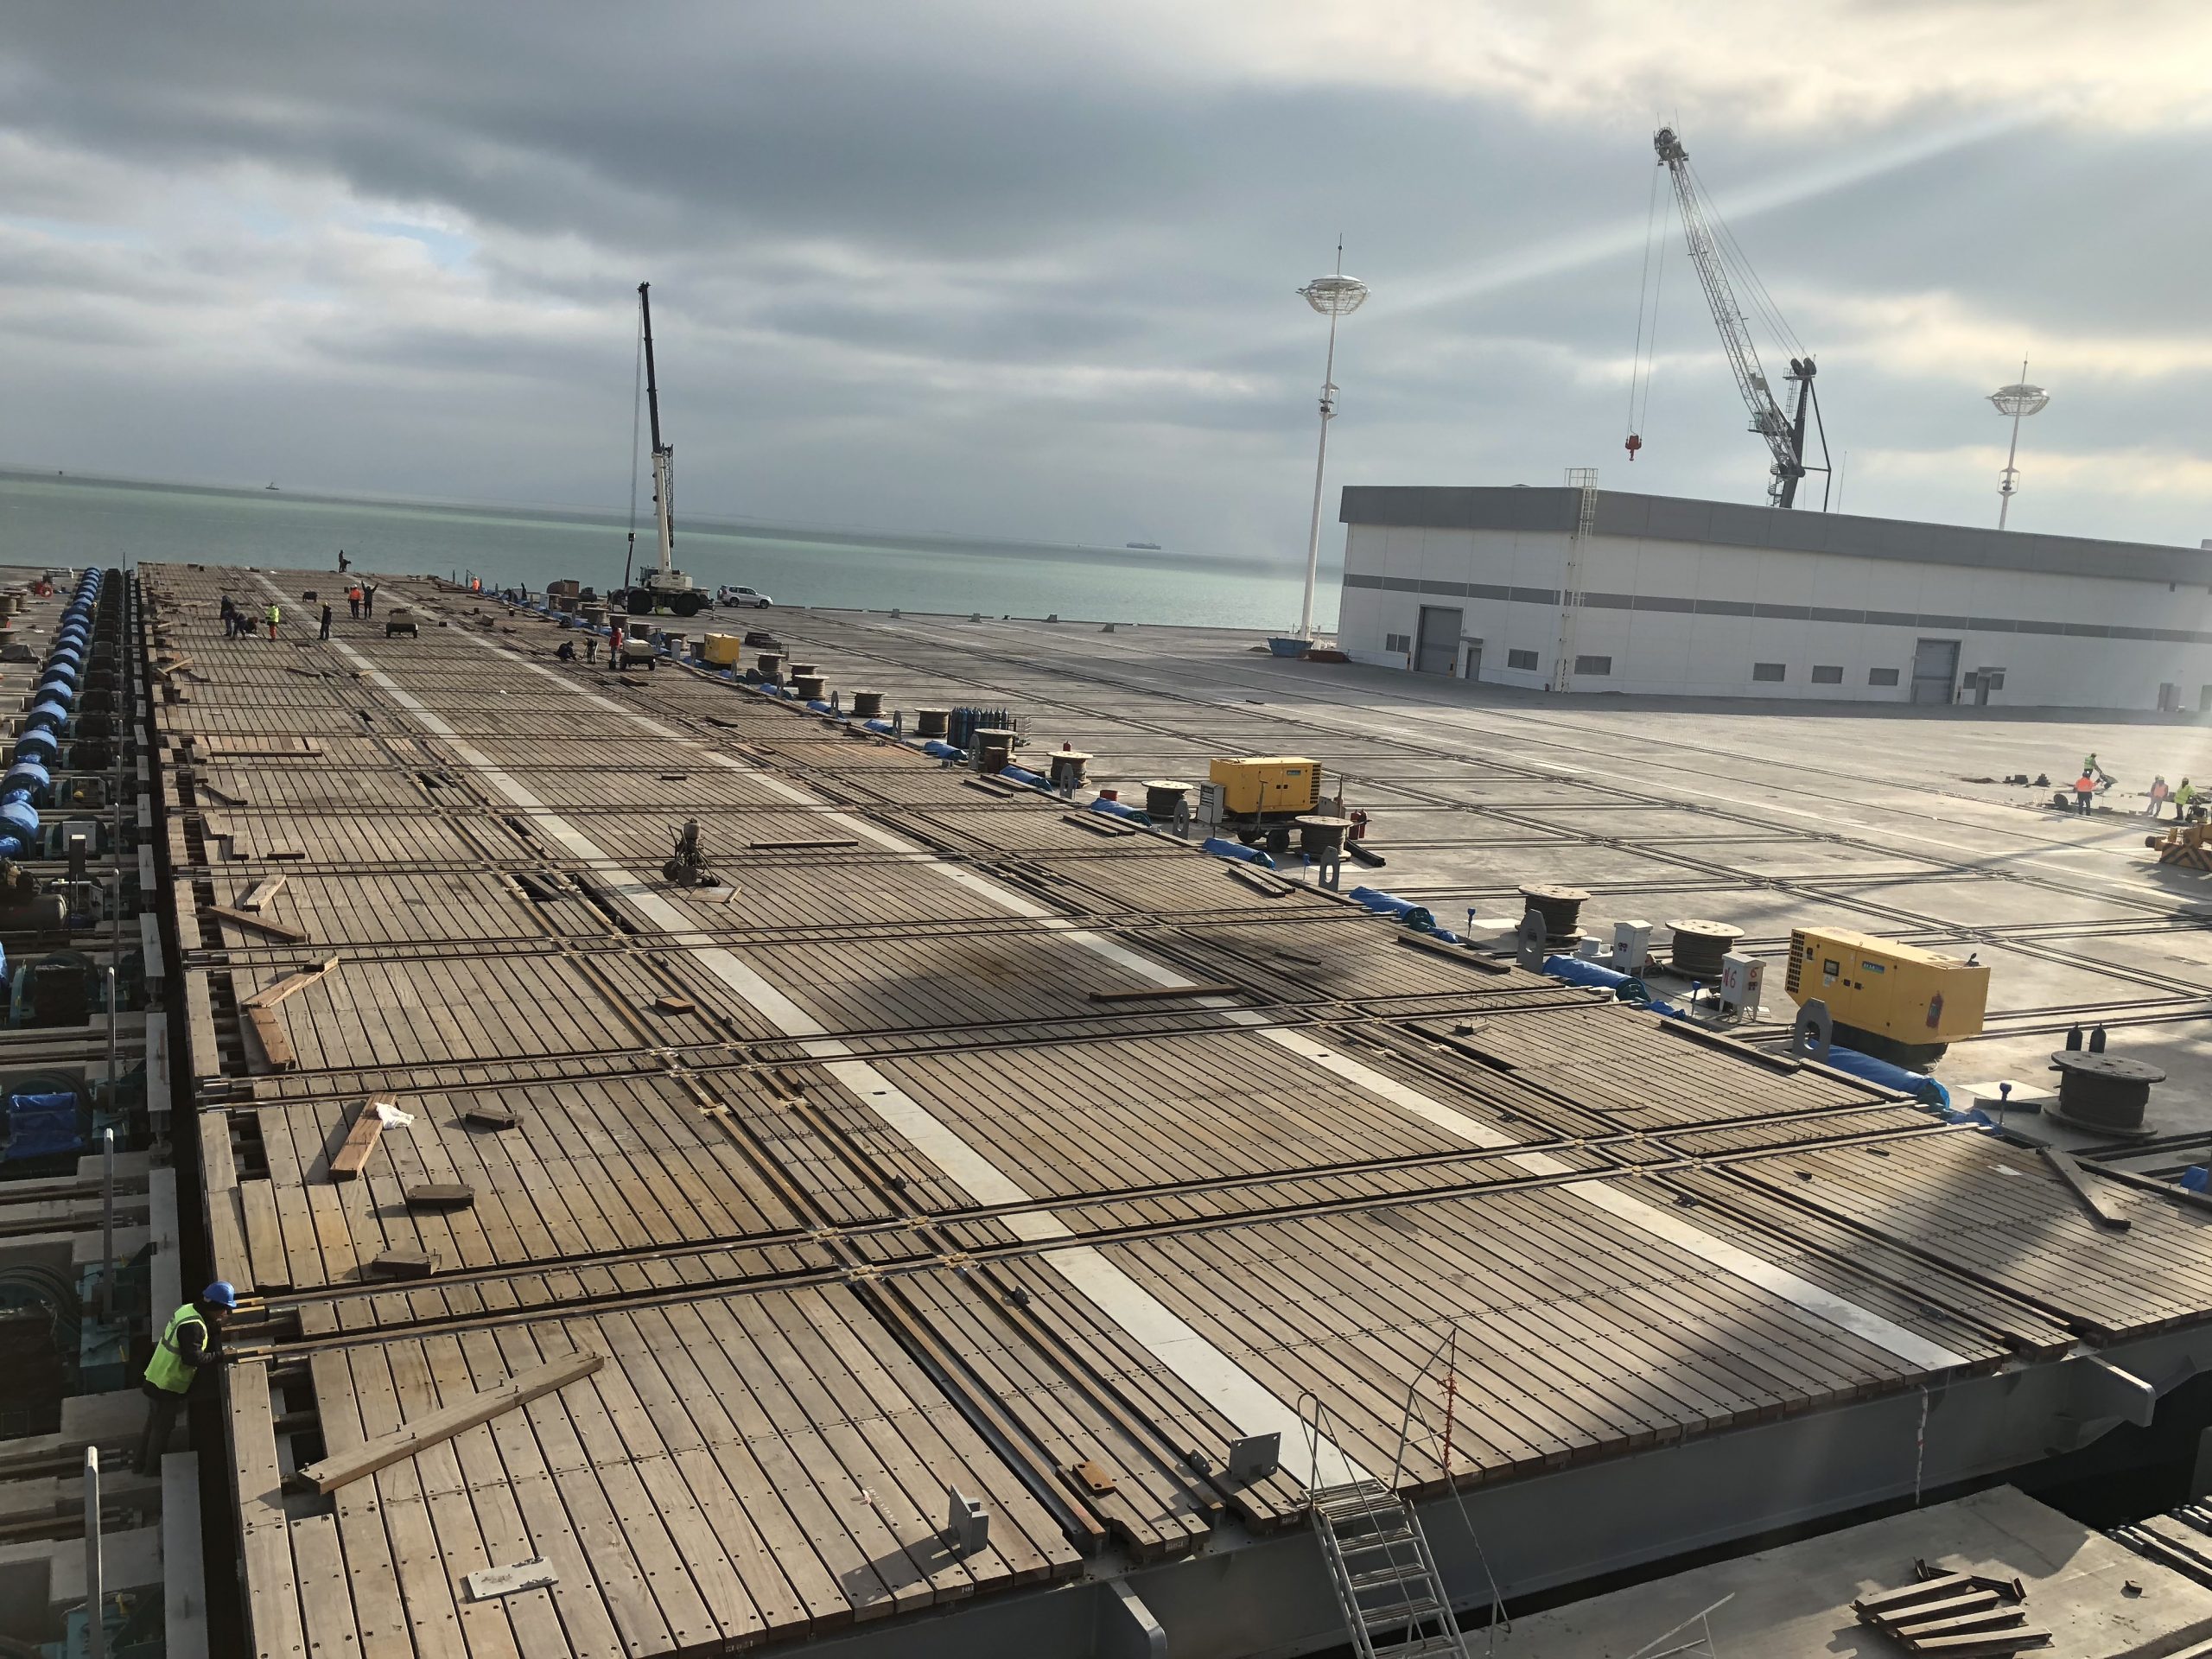 International Turkmenbashi Harbor Project – Shiplift Wood Covering , Rail Crossing Assembly and Welding Works